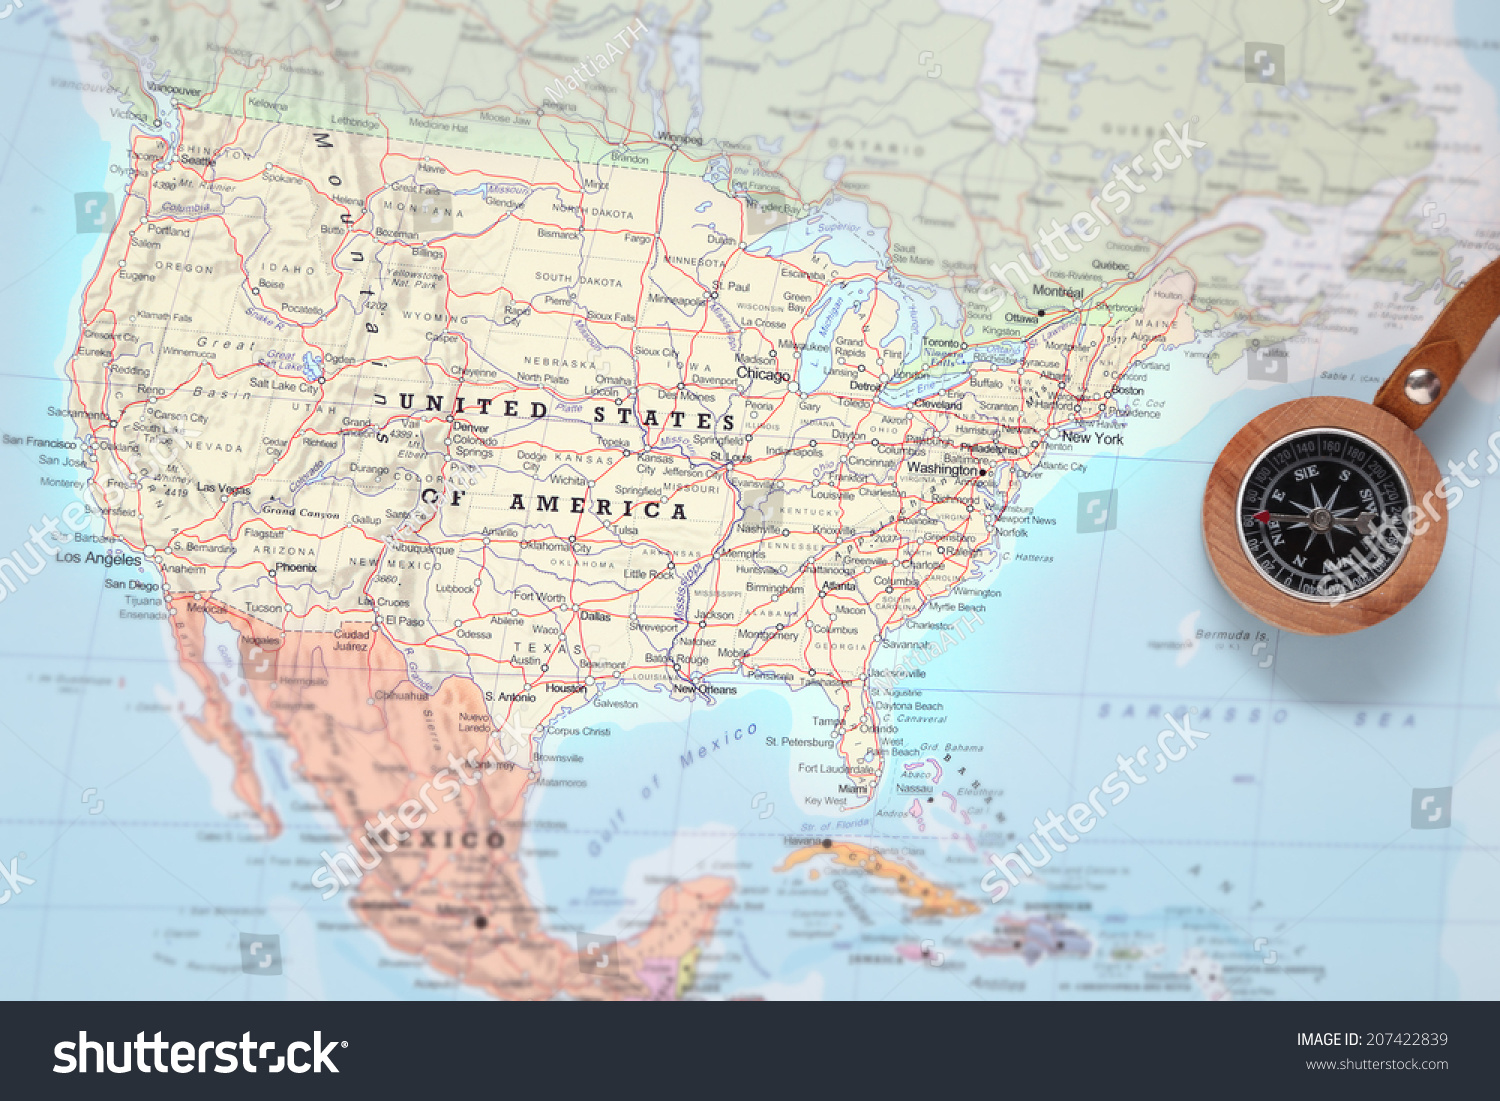 Compass on a map pointing at United States and planning a travel destination #207422839